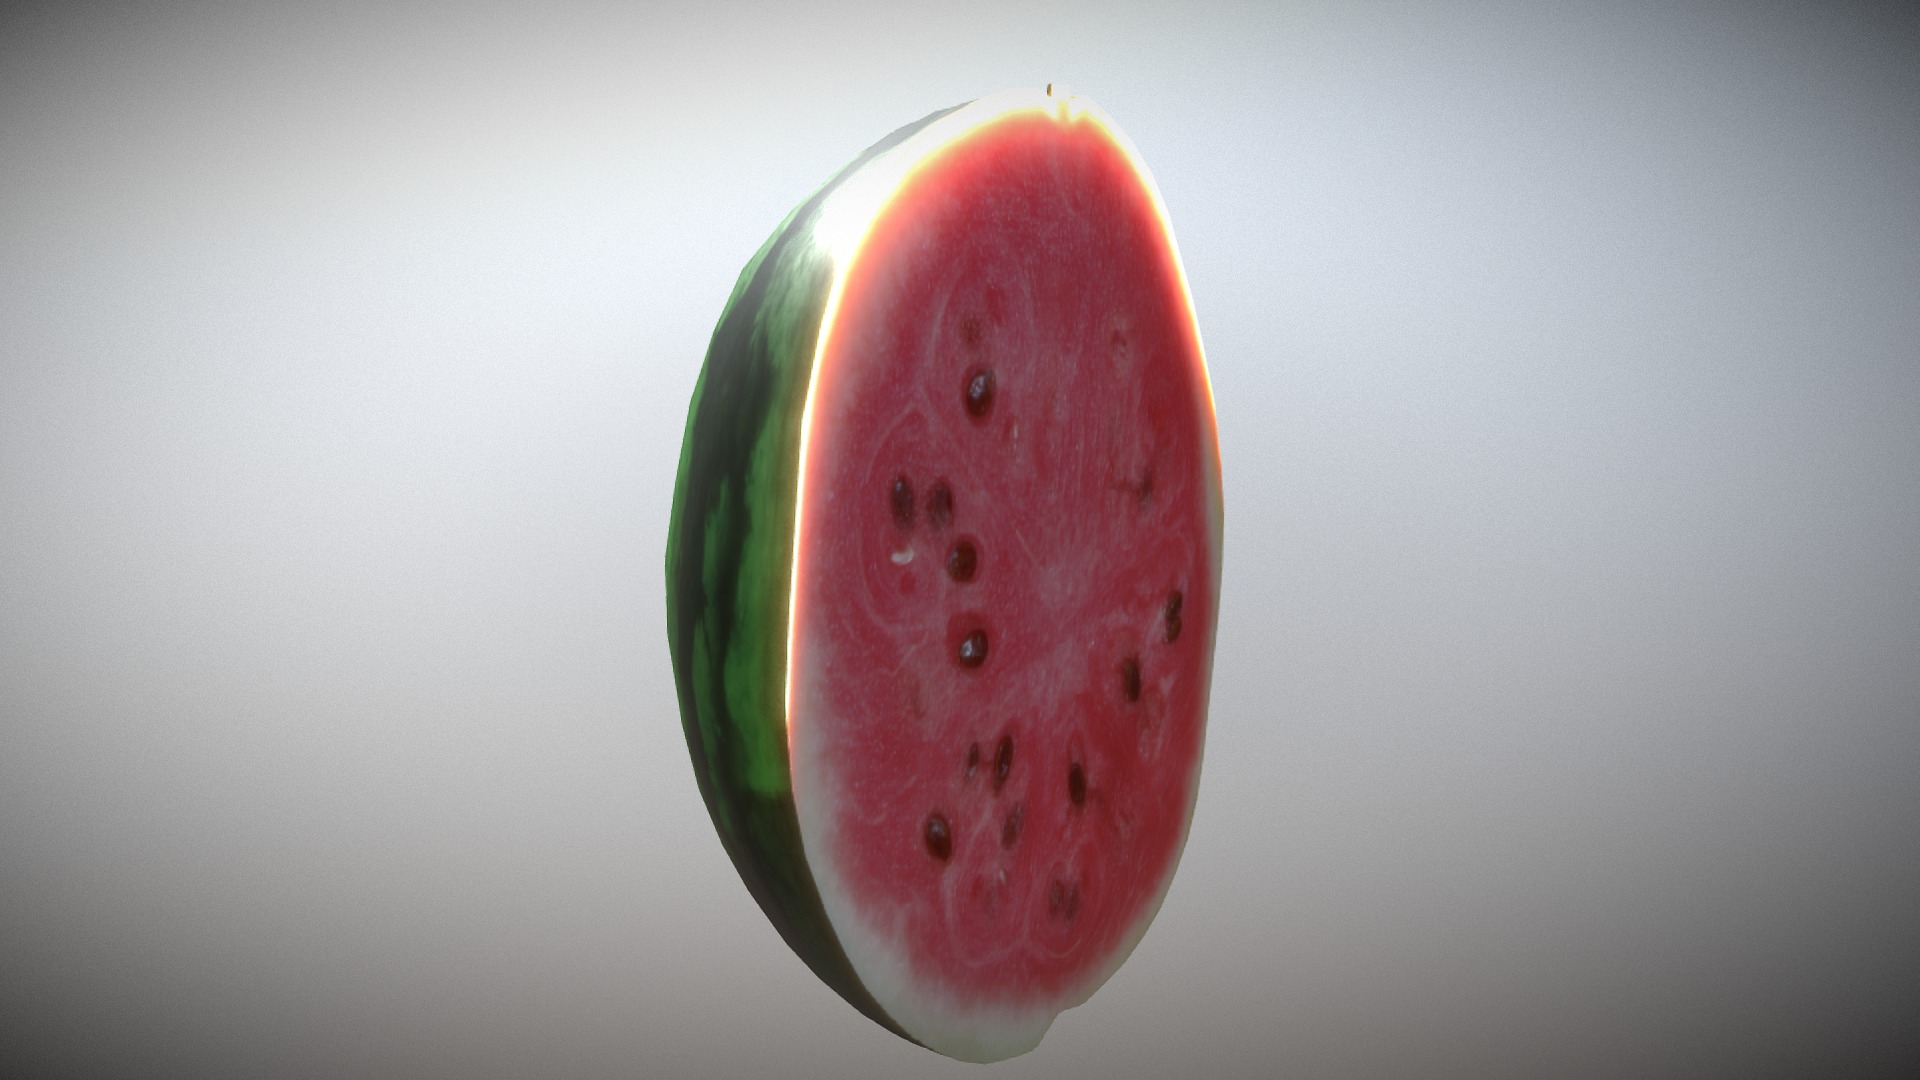 3D model Watermelon - This is a 3D model of the Watermelon. The 3D model is about a red and green balloon.